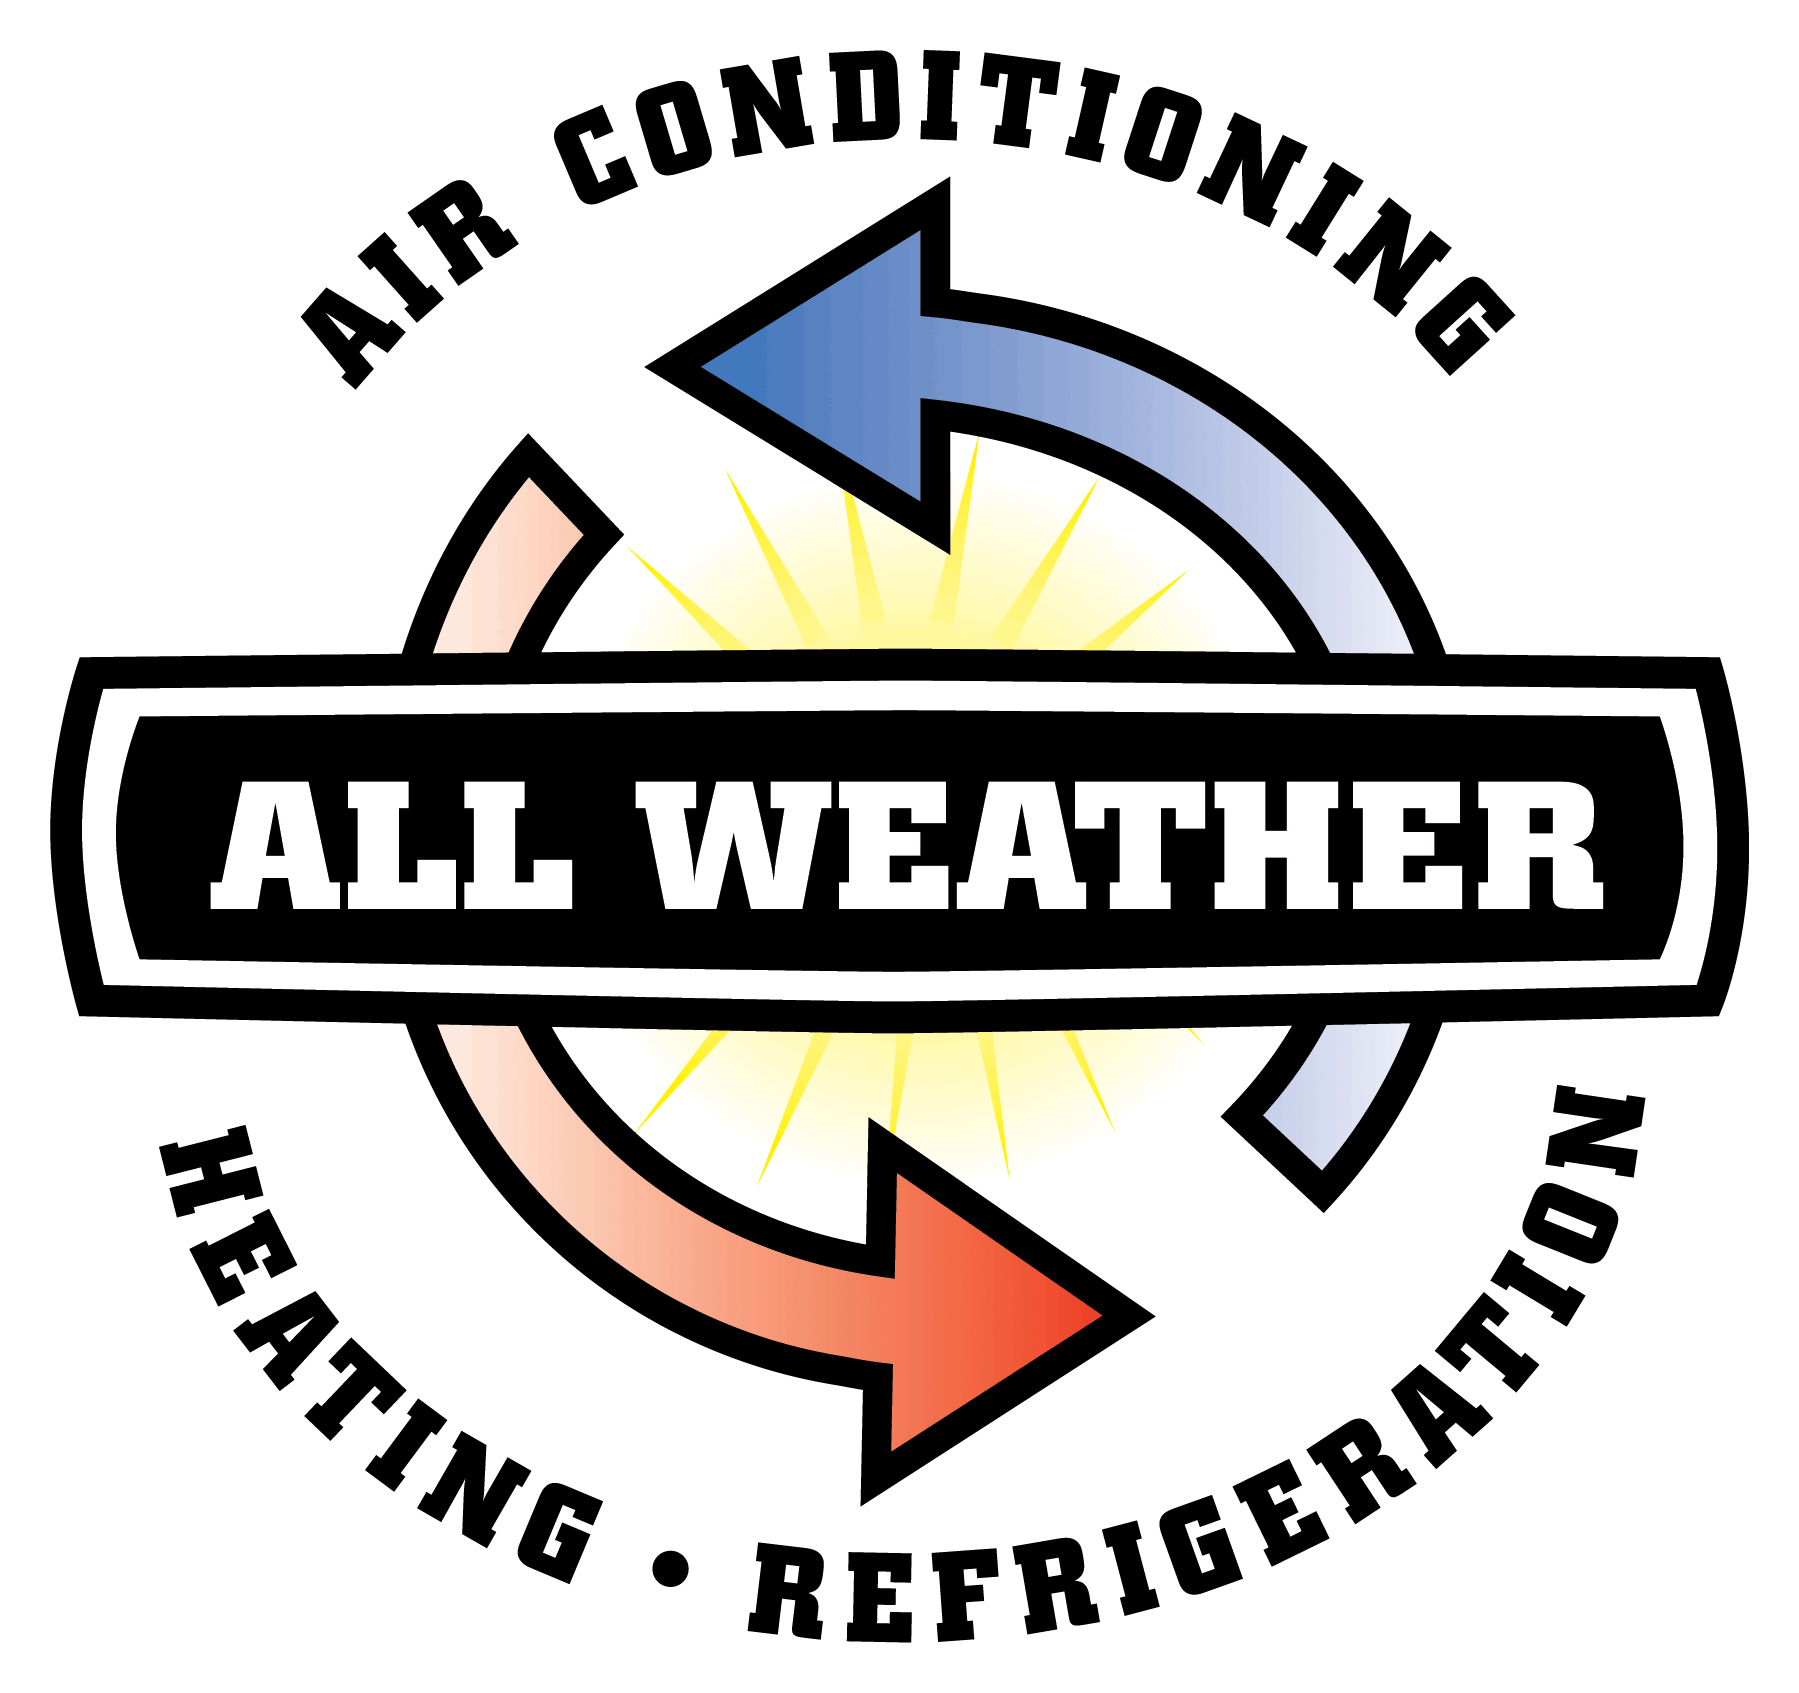 All Weather Heating and Air Conditioning logo